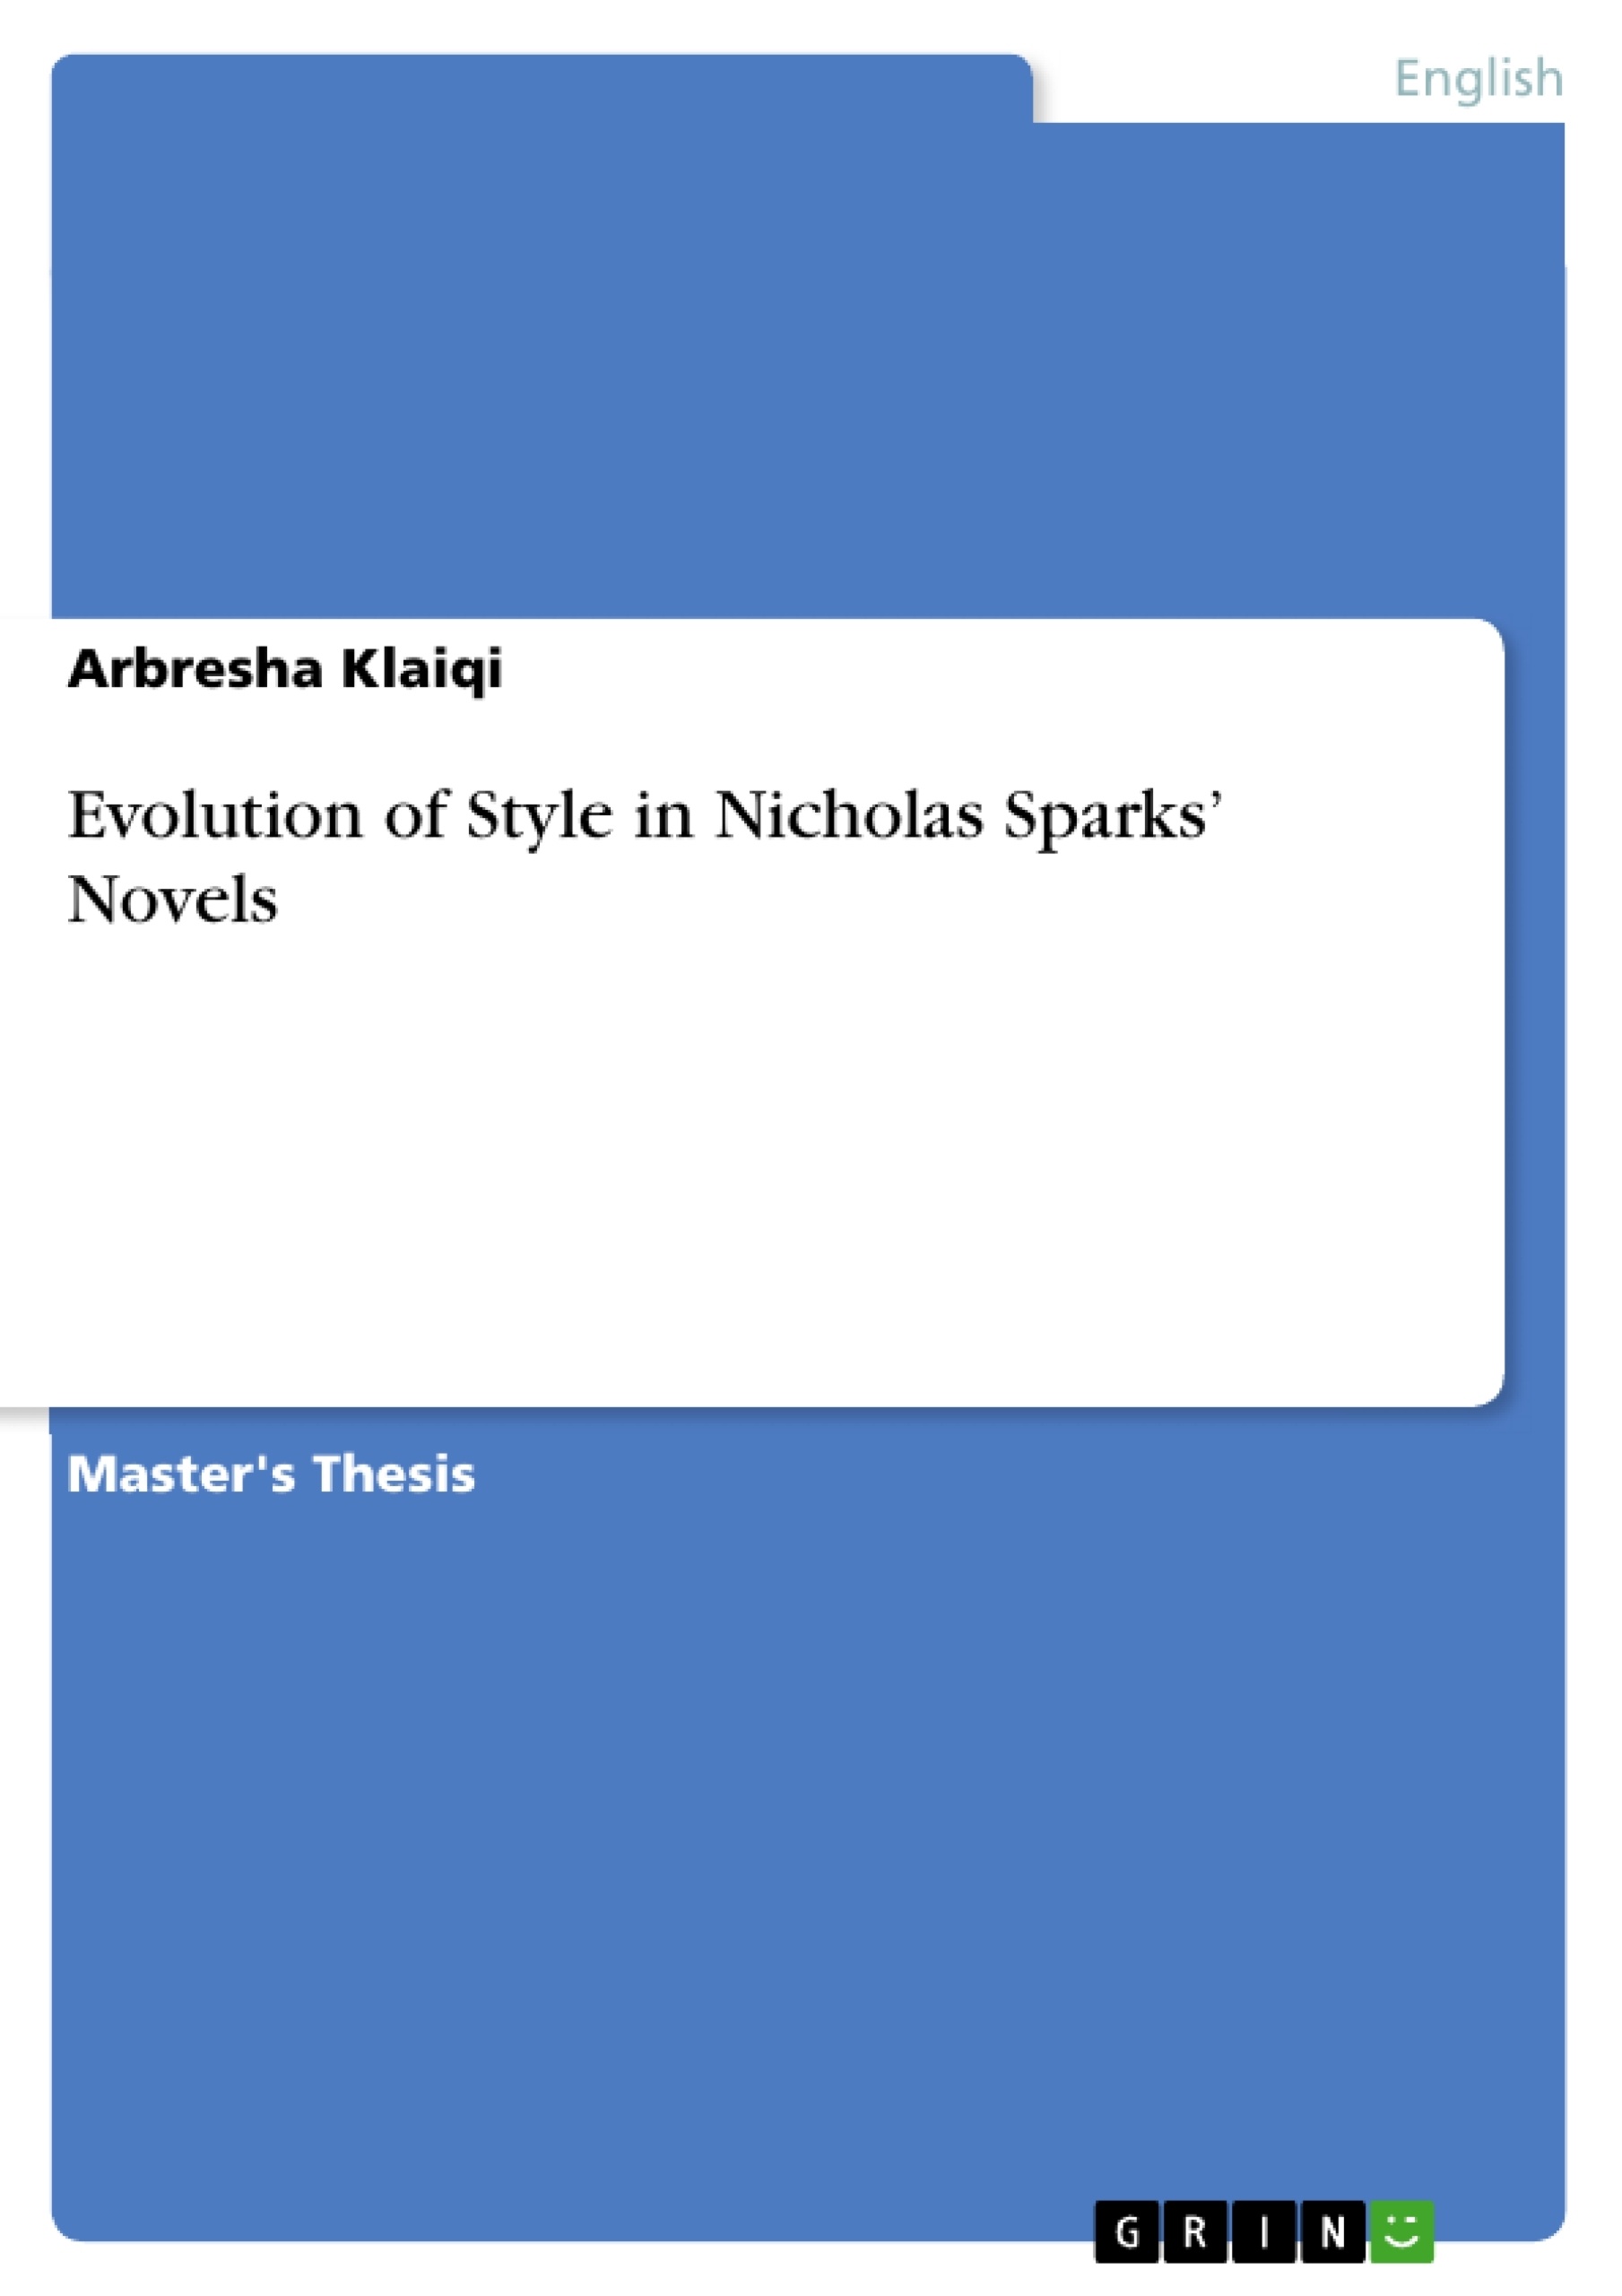 Título: Evolution of Style in Nicholas Sparks’ Novels